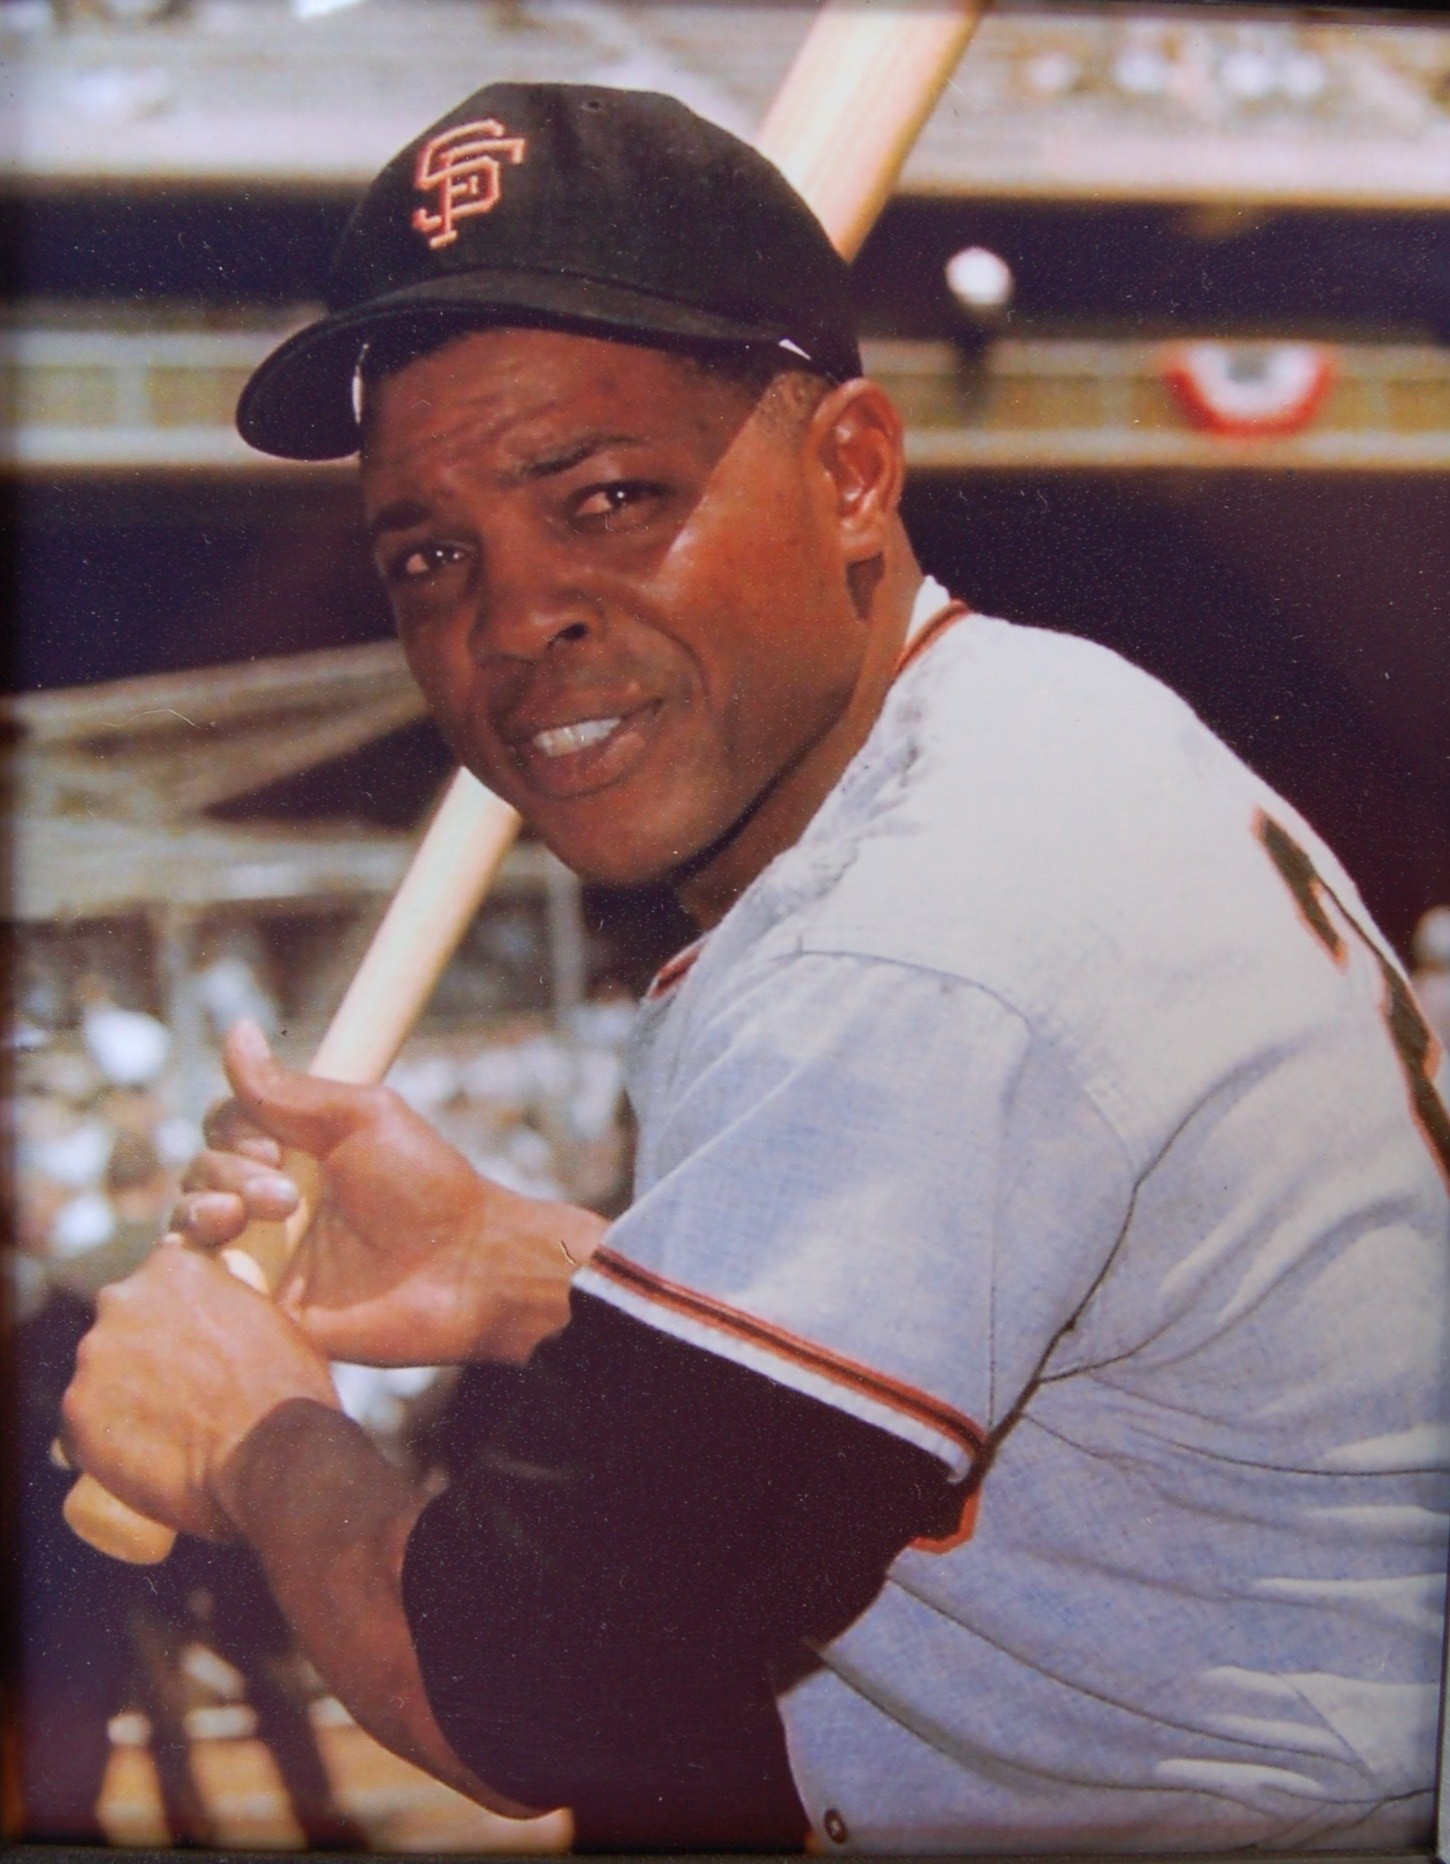 1954 Willie Mays San Francisco Giants Mitchell and Ness Ness MLB